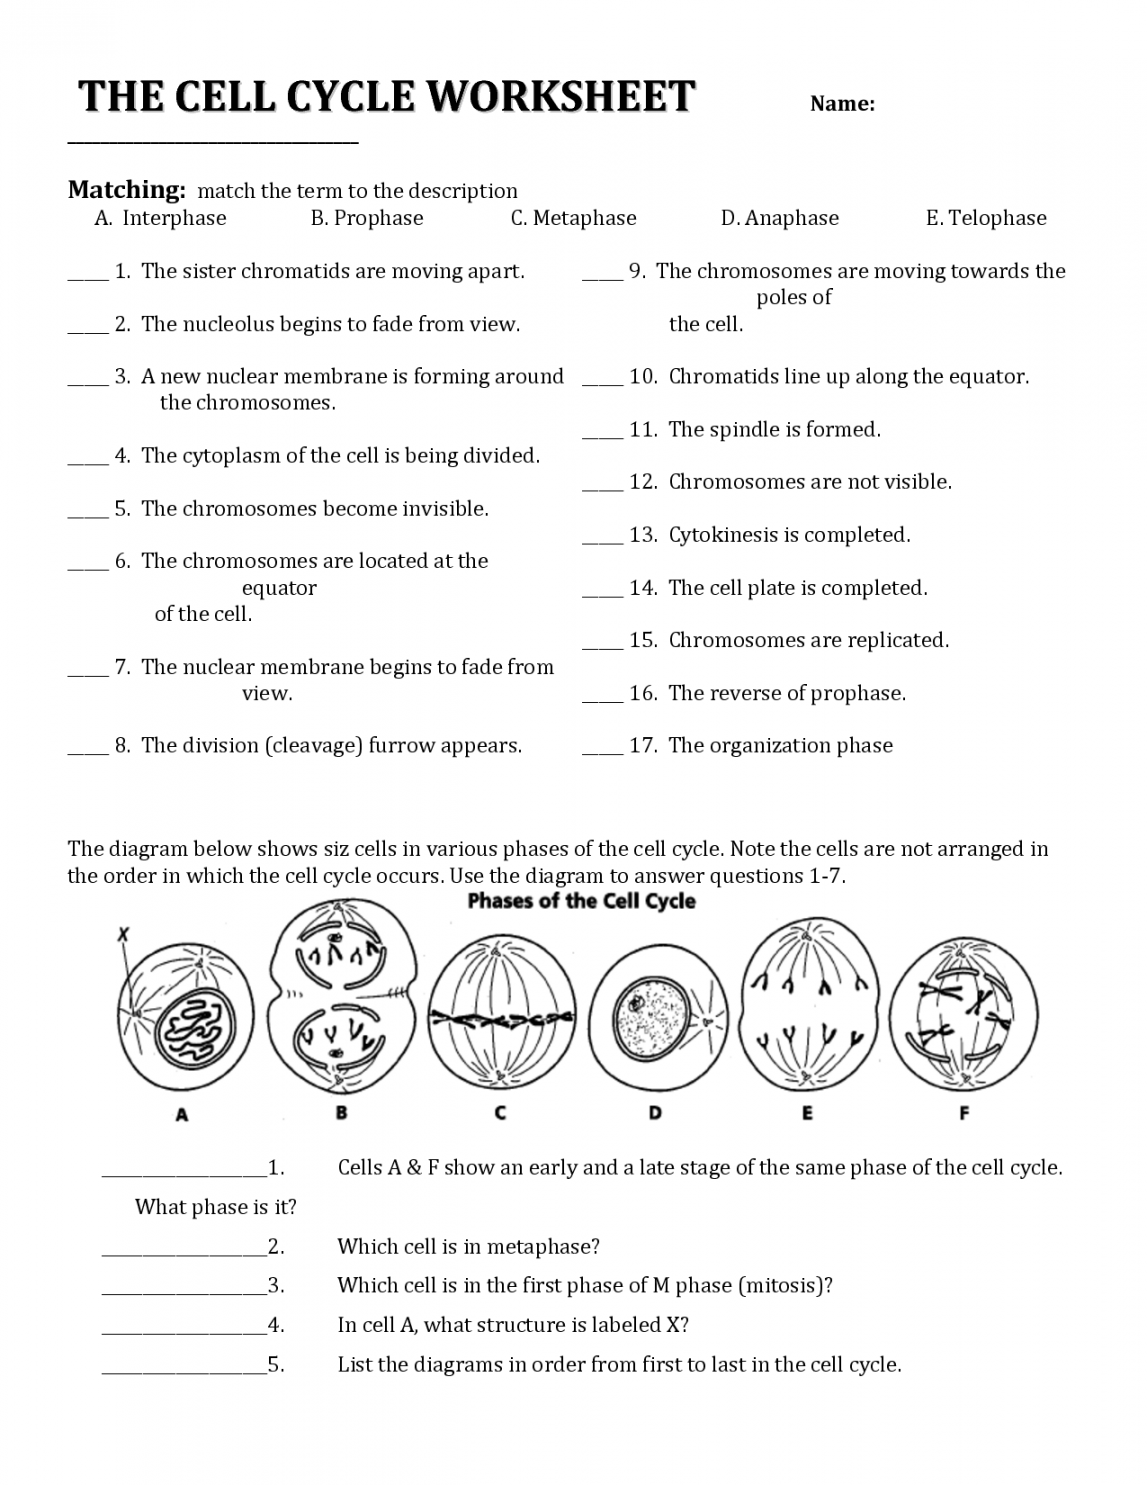 Cell Cycle Worksheet Answers  Cell cycle, Biology classroom